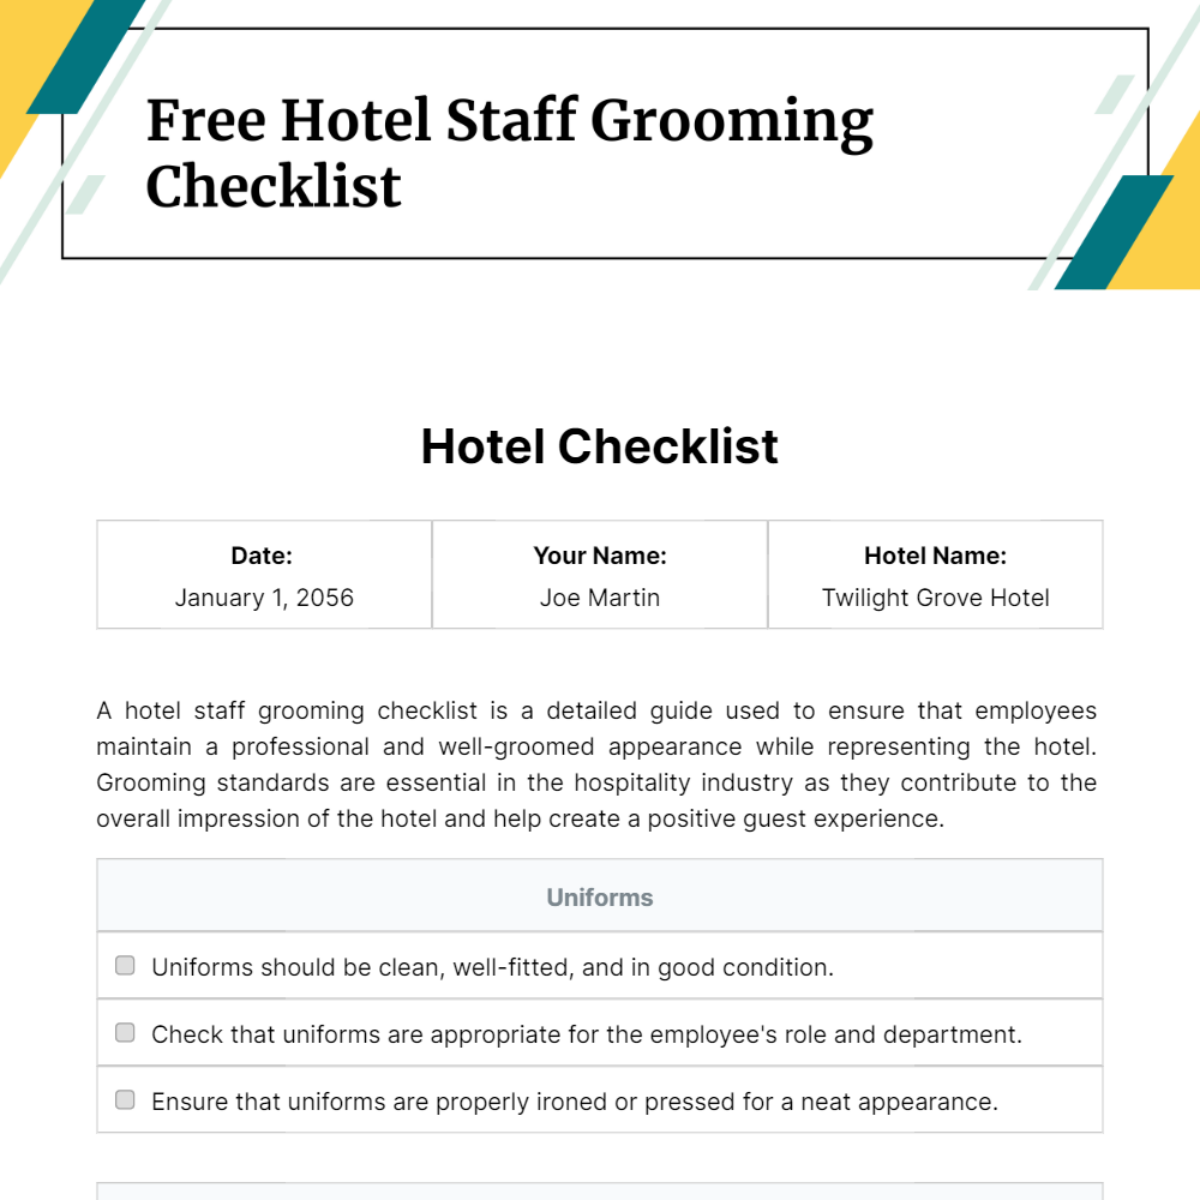 Hotel Staff Grooming Checklist Template